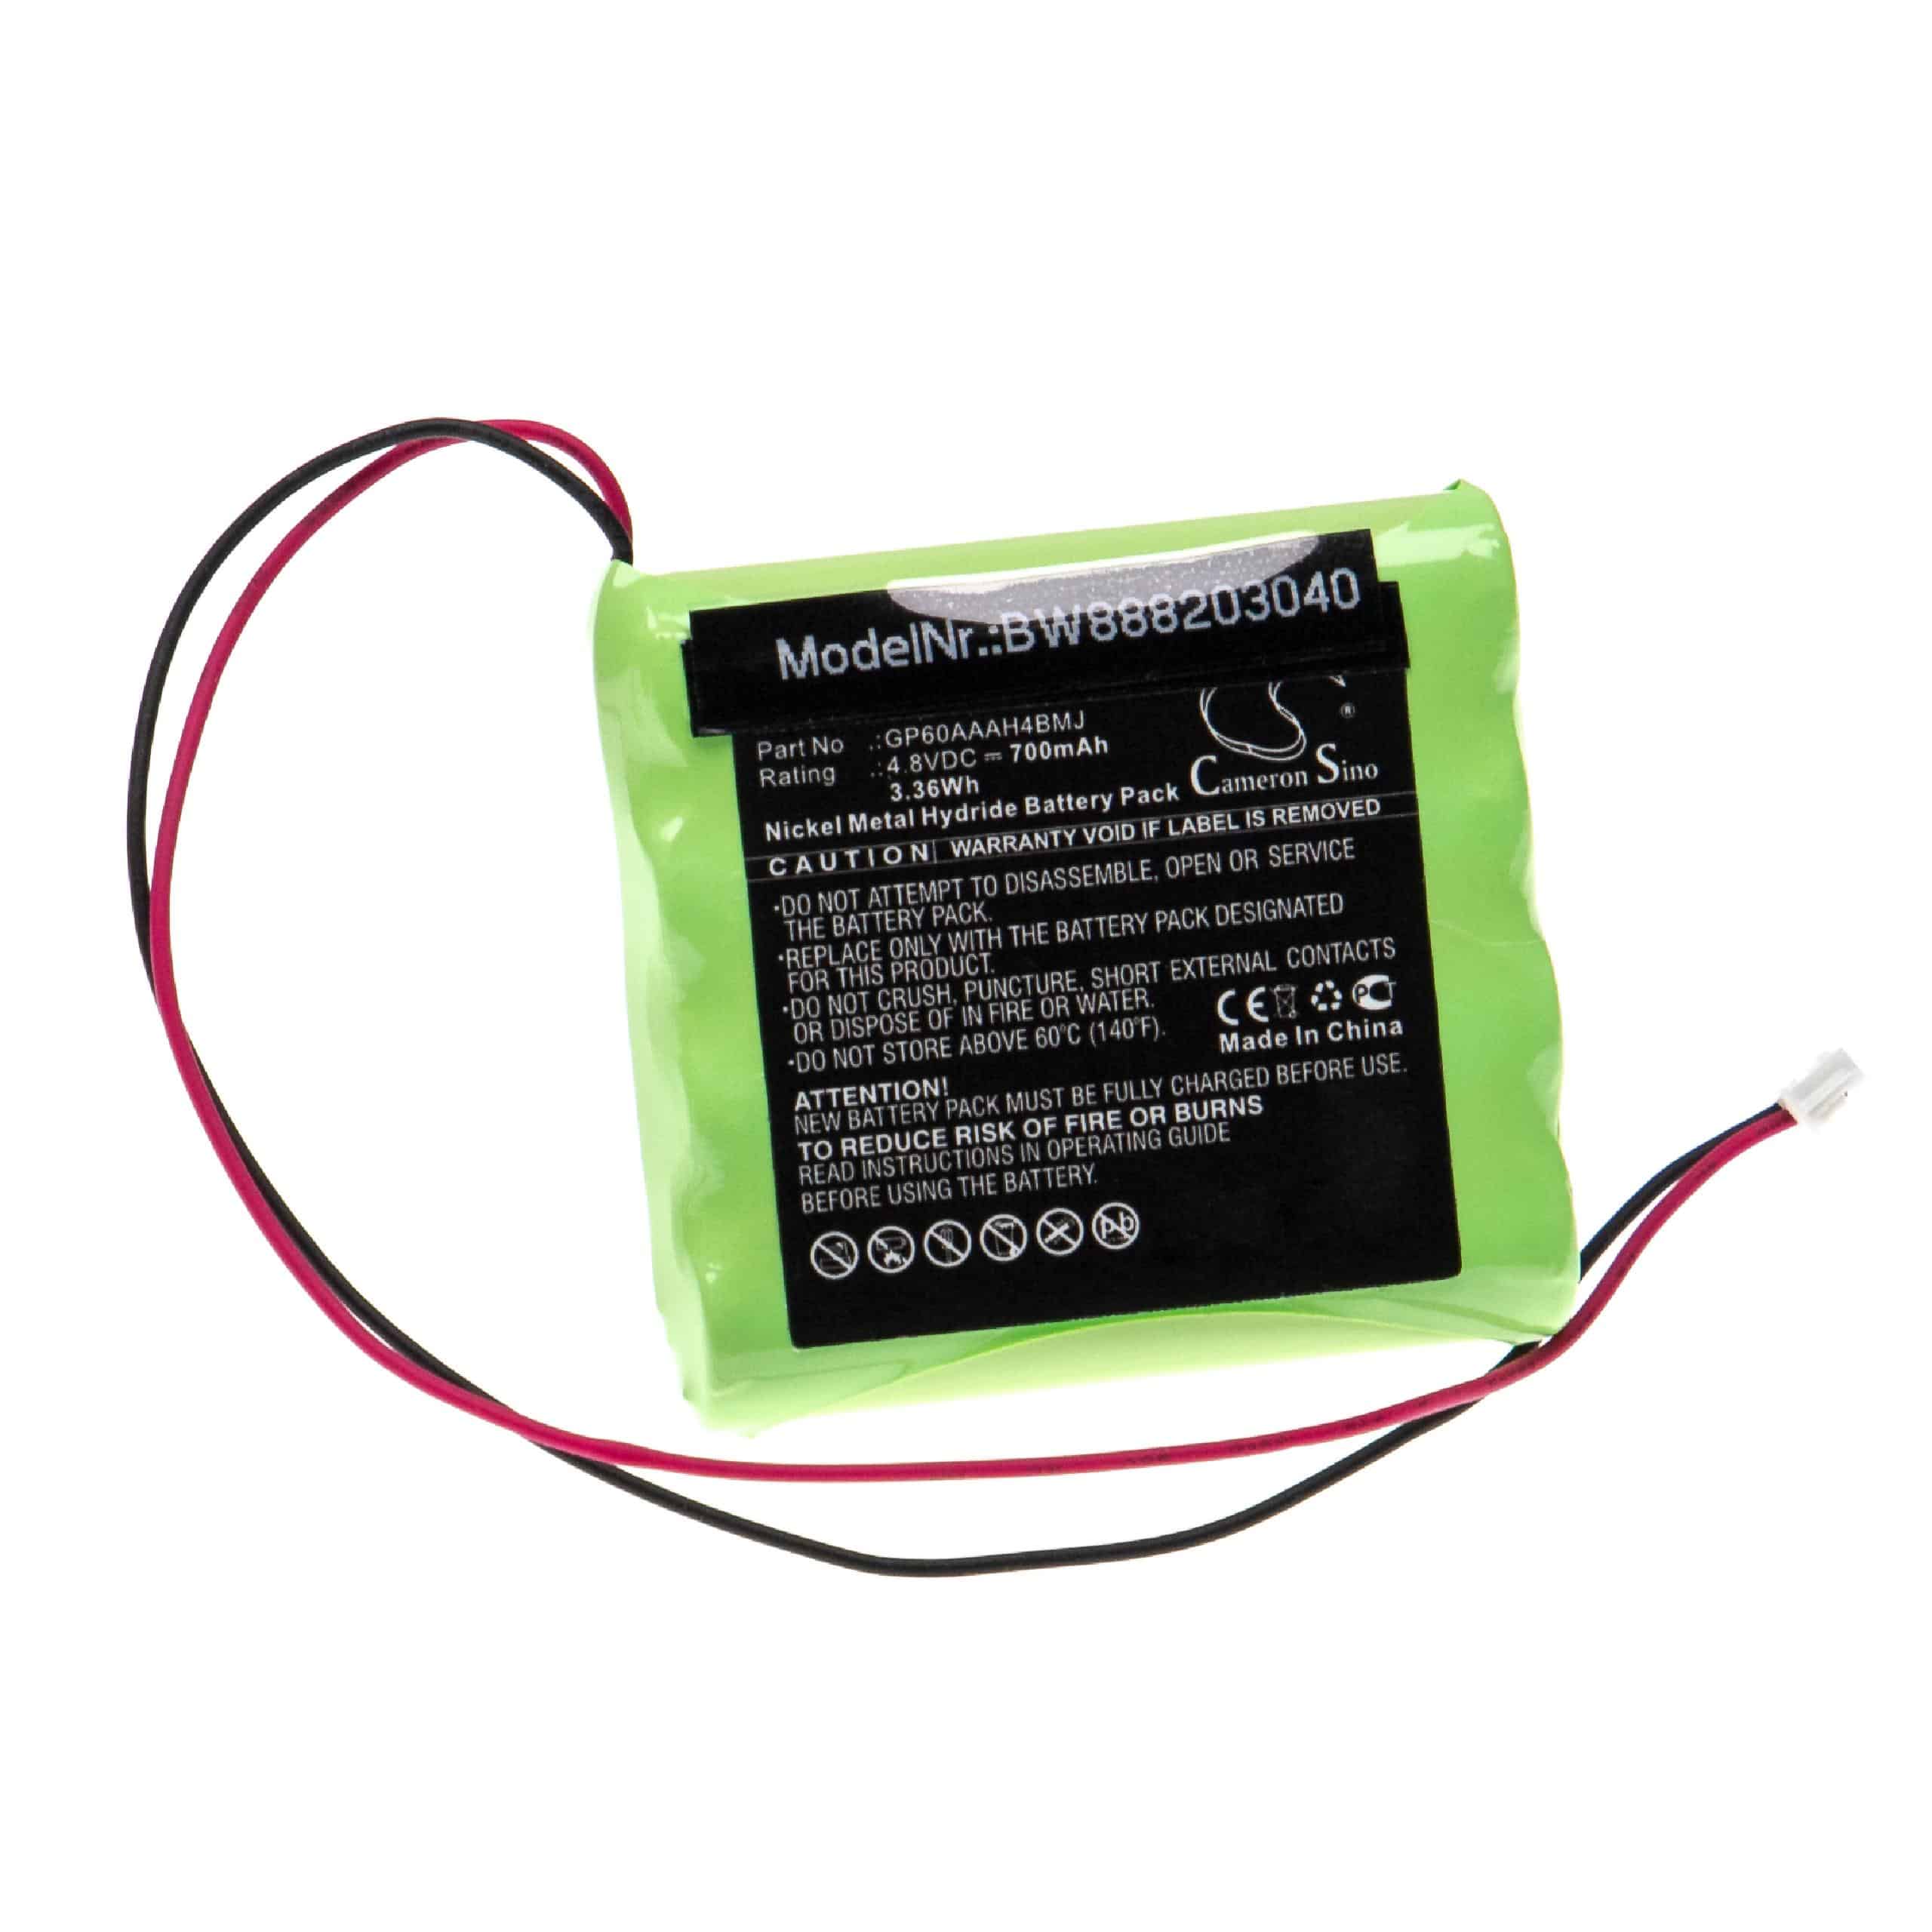 Alarm System Battery Replacement for Yale GP60AAAH4BMJ - 700mAh 4.8V NiMH